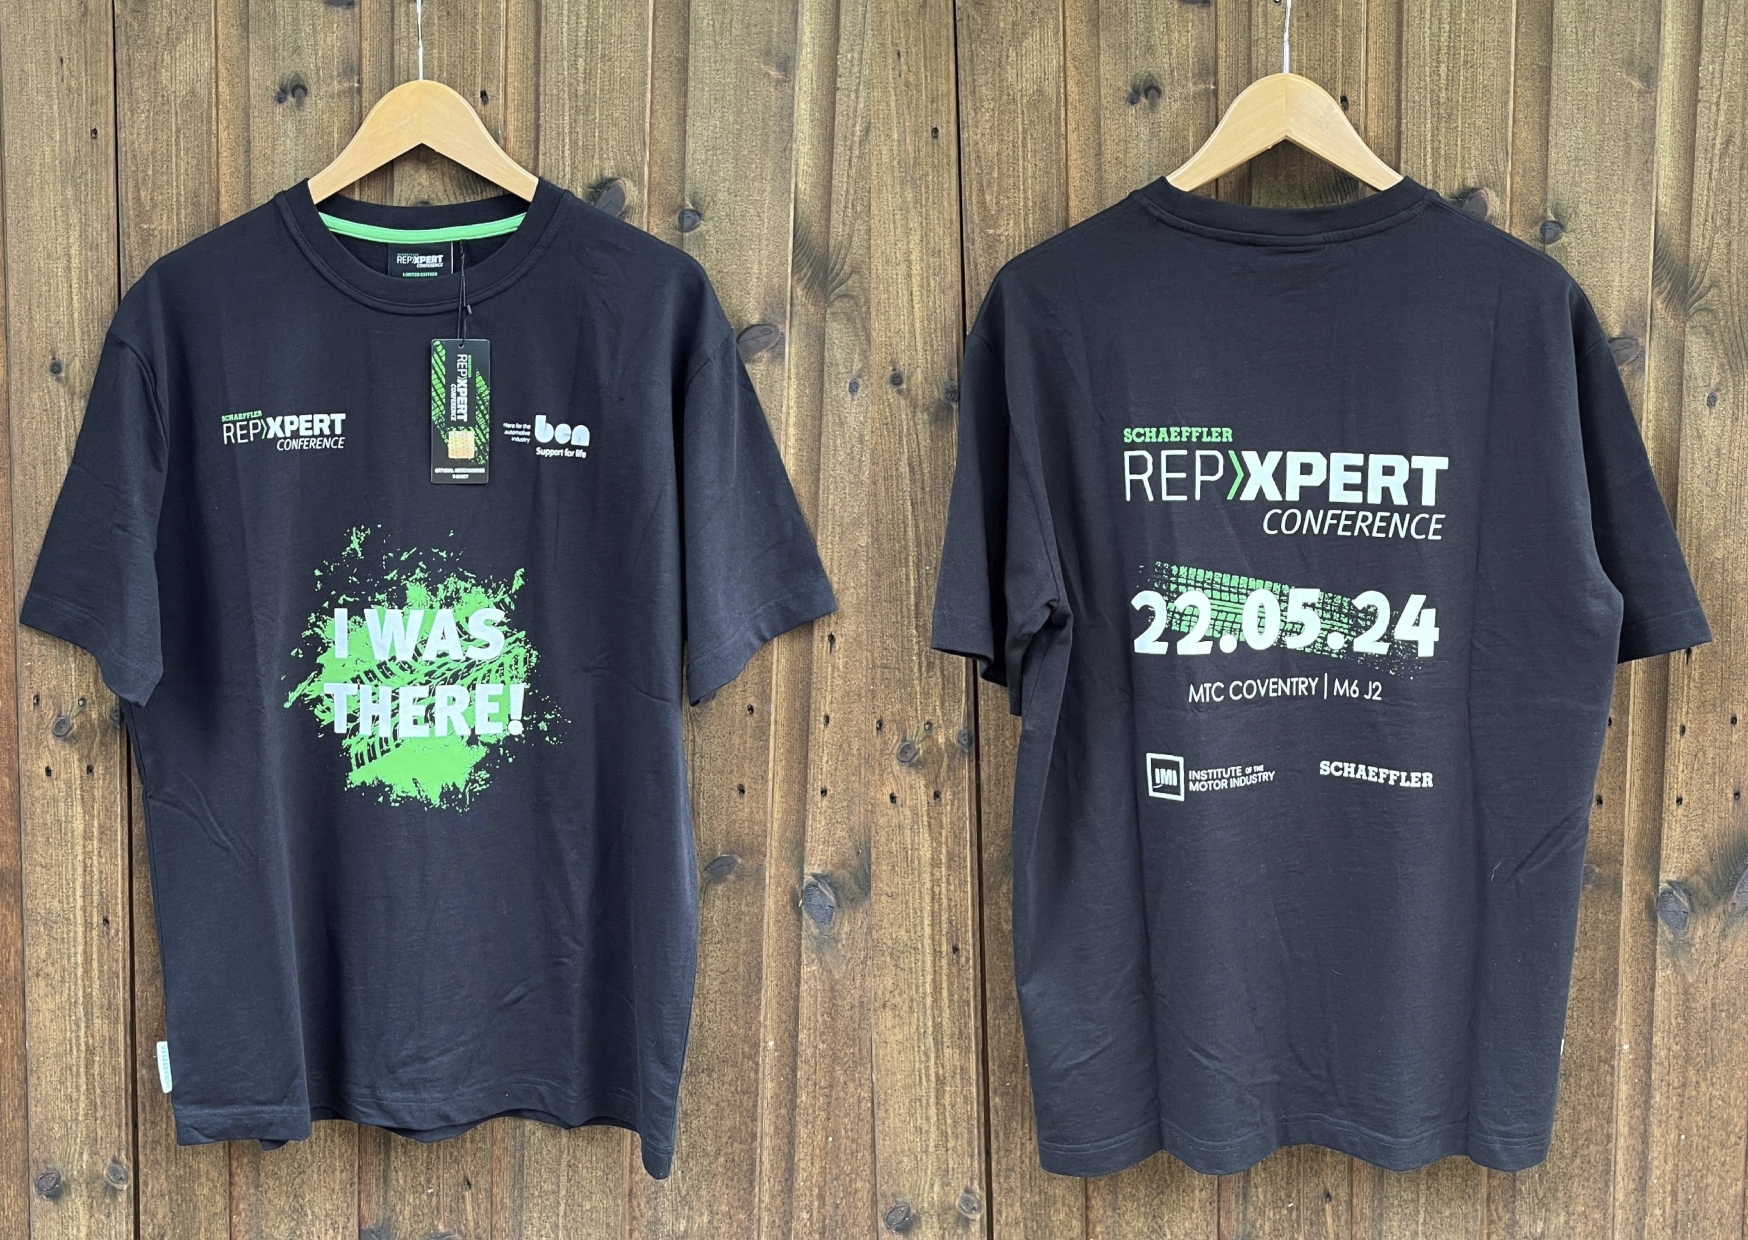 Repxpert Conference t-shirts to raise money for Ben